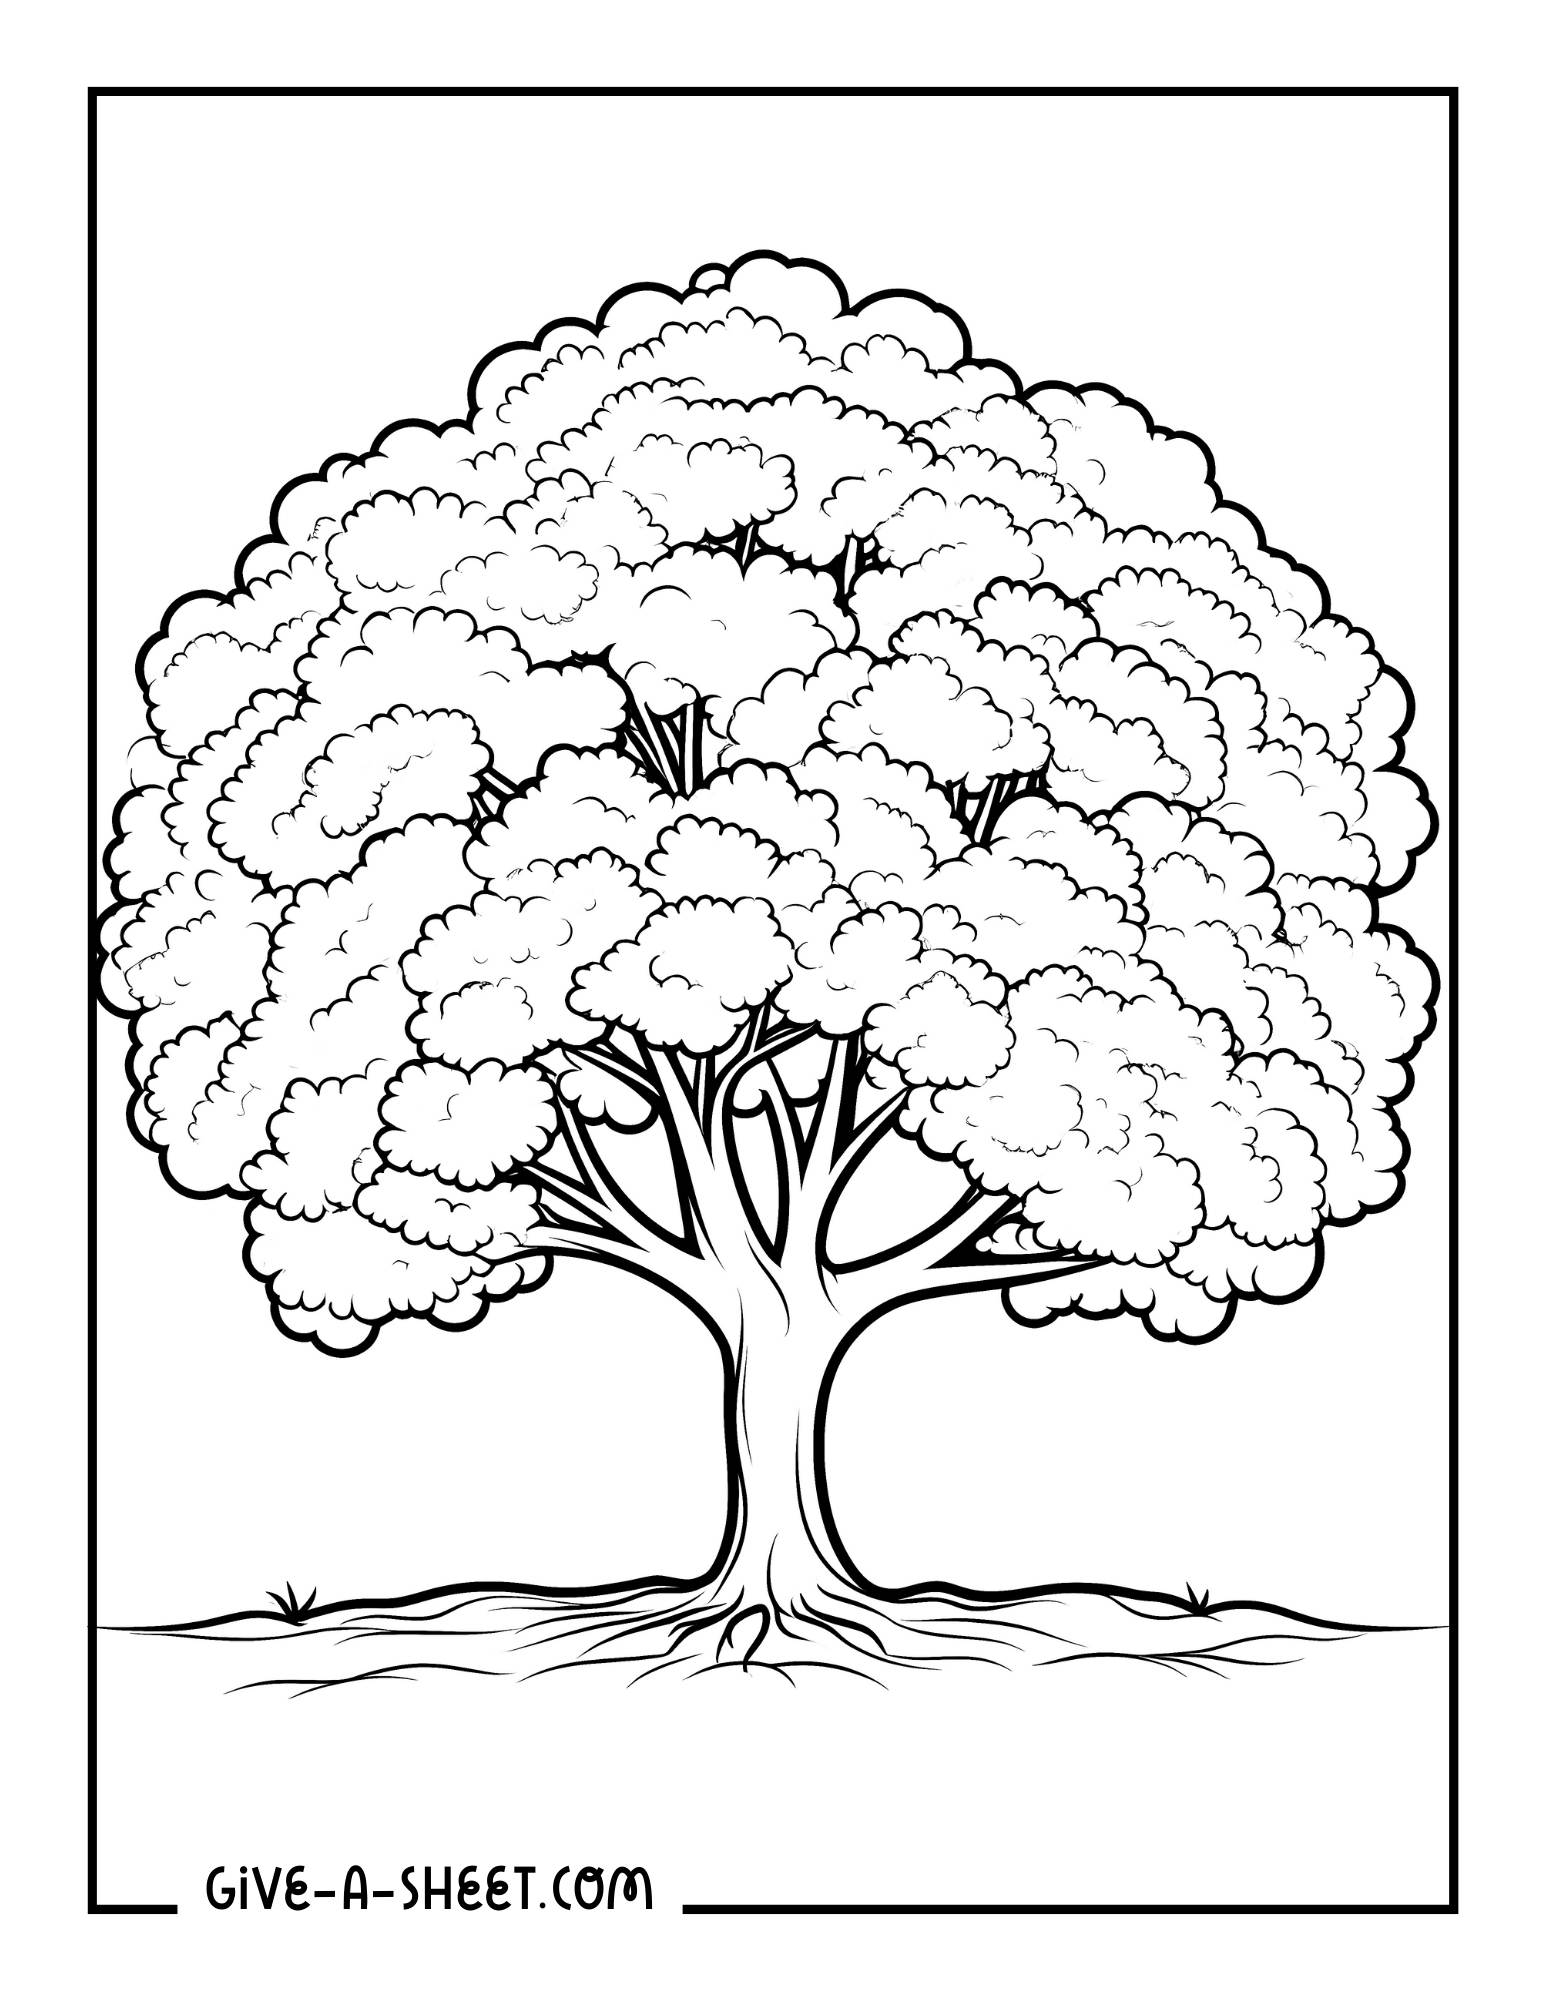 Southern live oak tree coloring page.